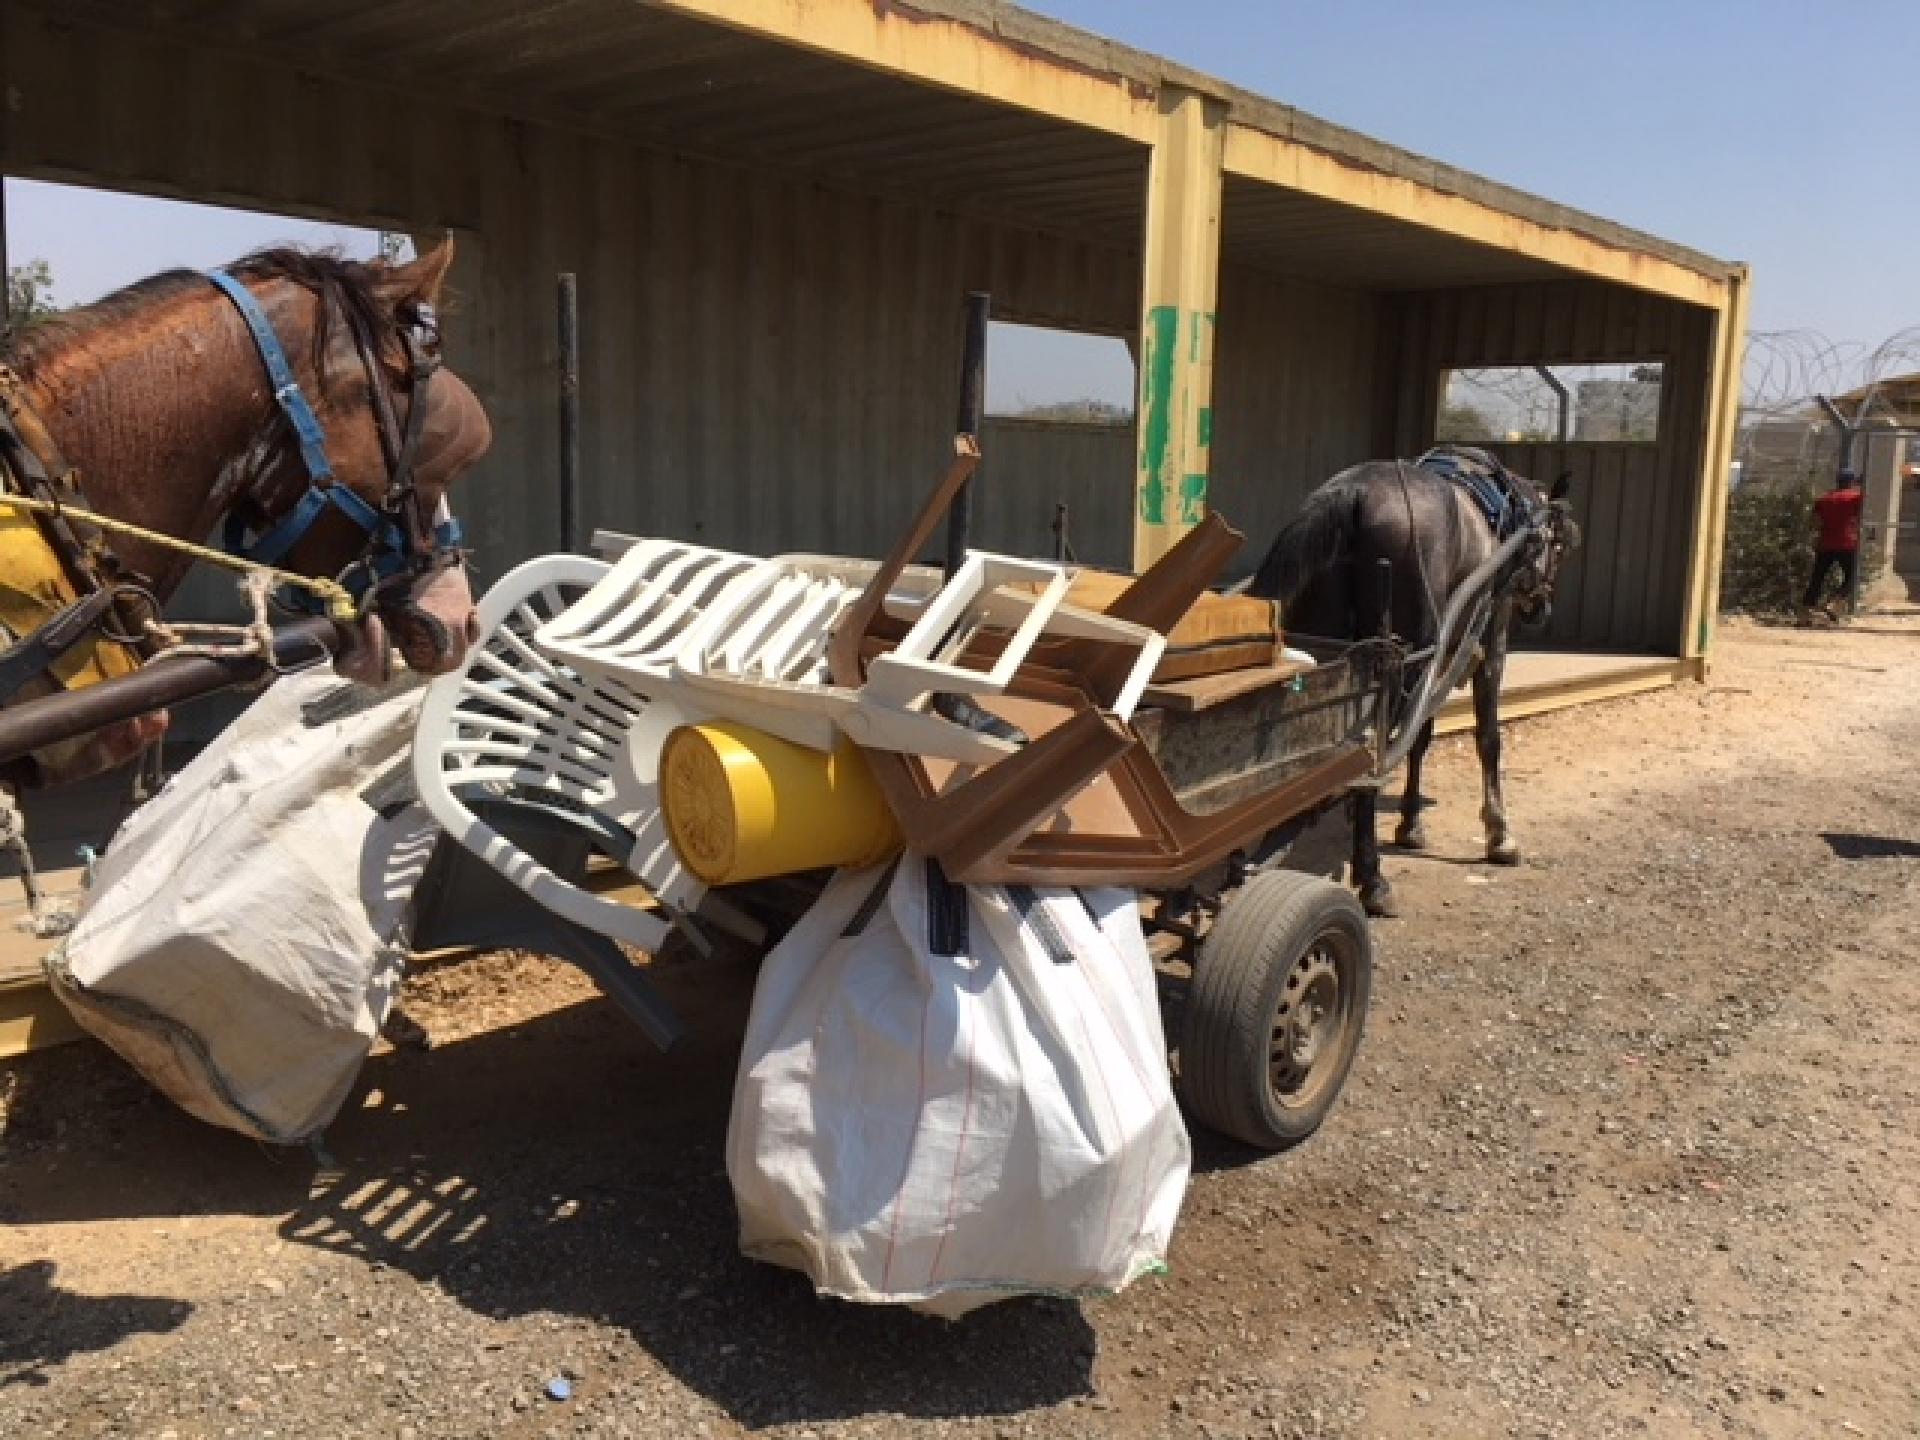 A loaded cart on the way to the checkpoint